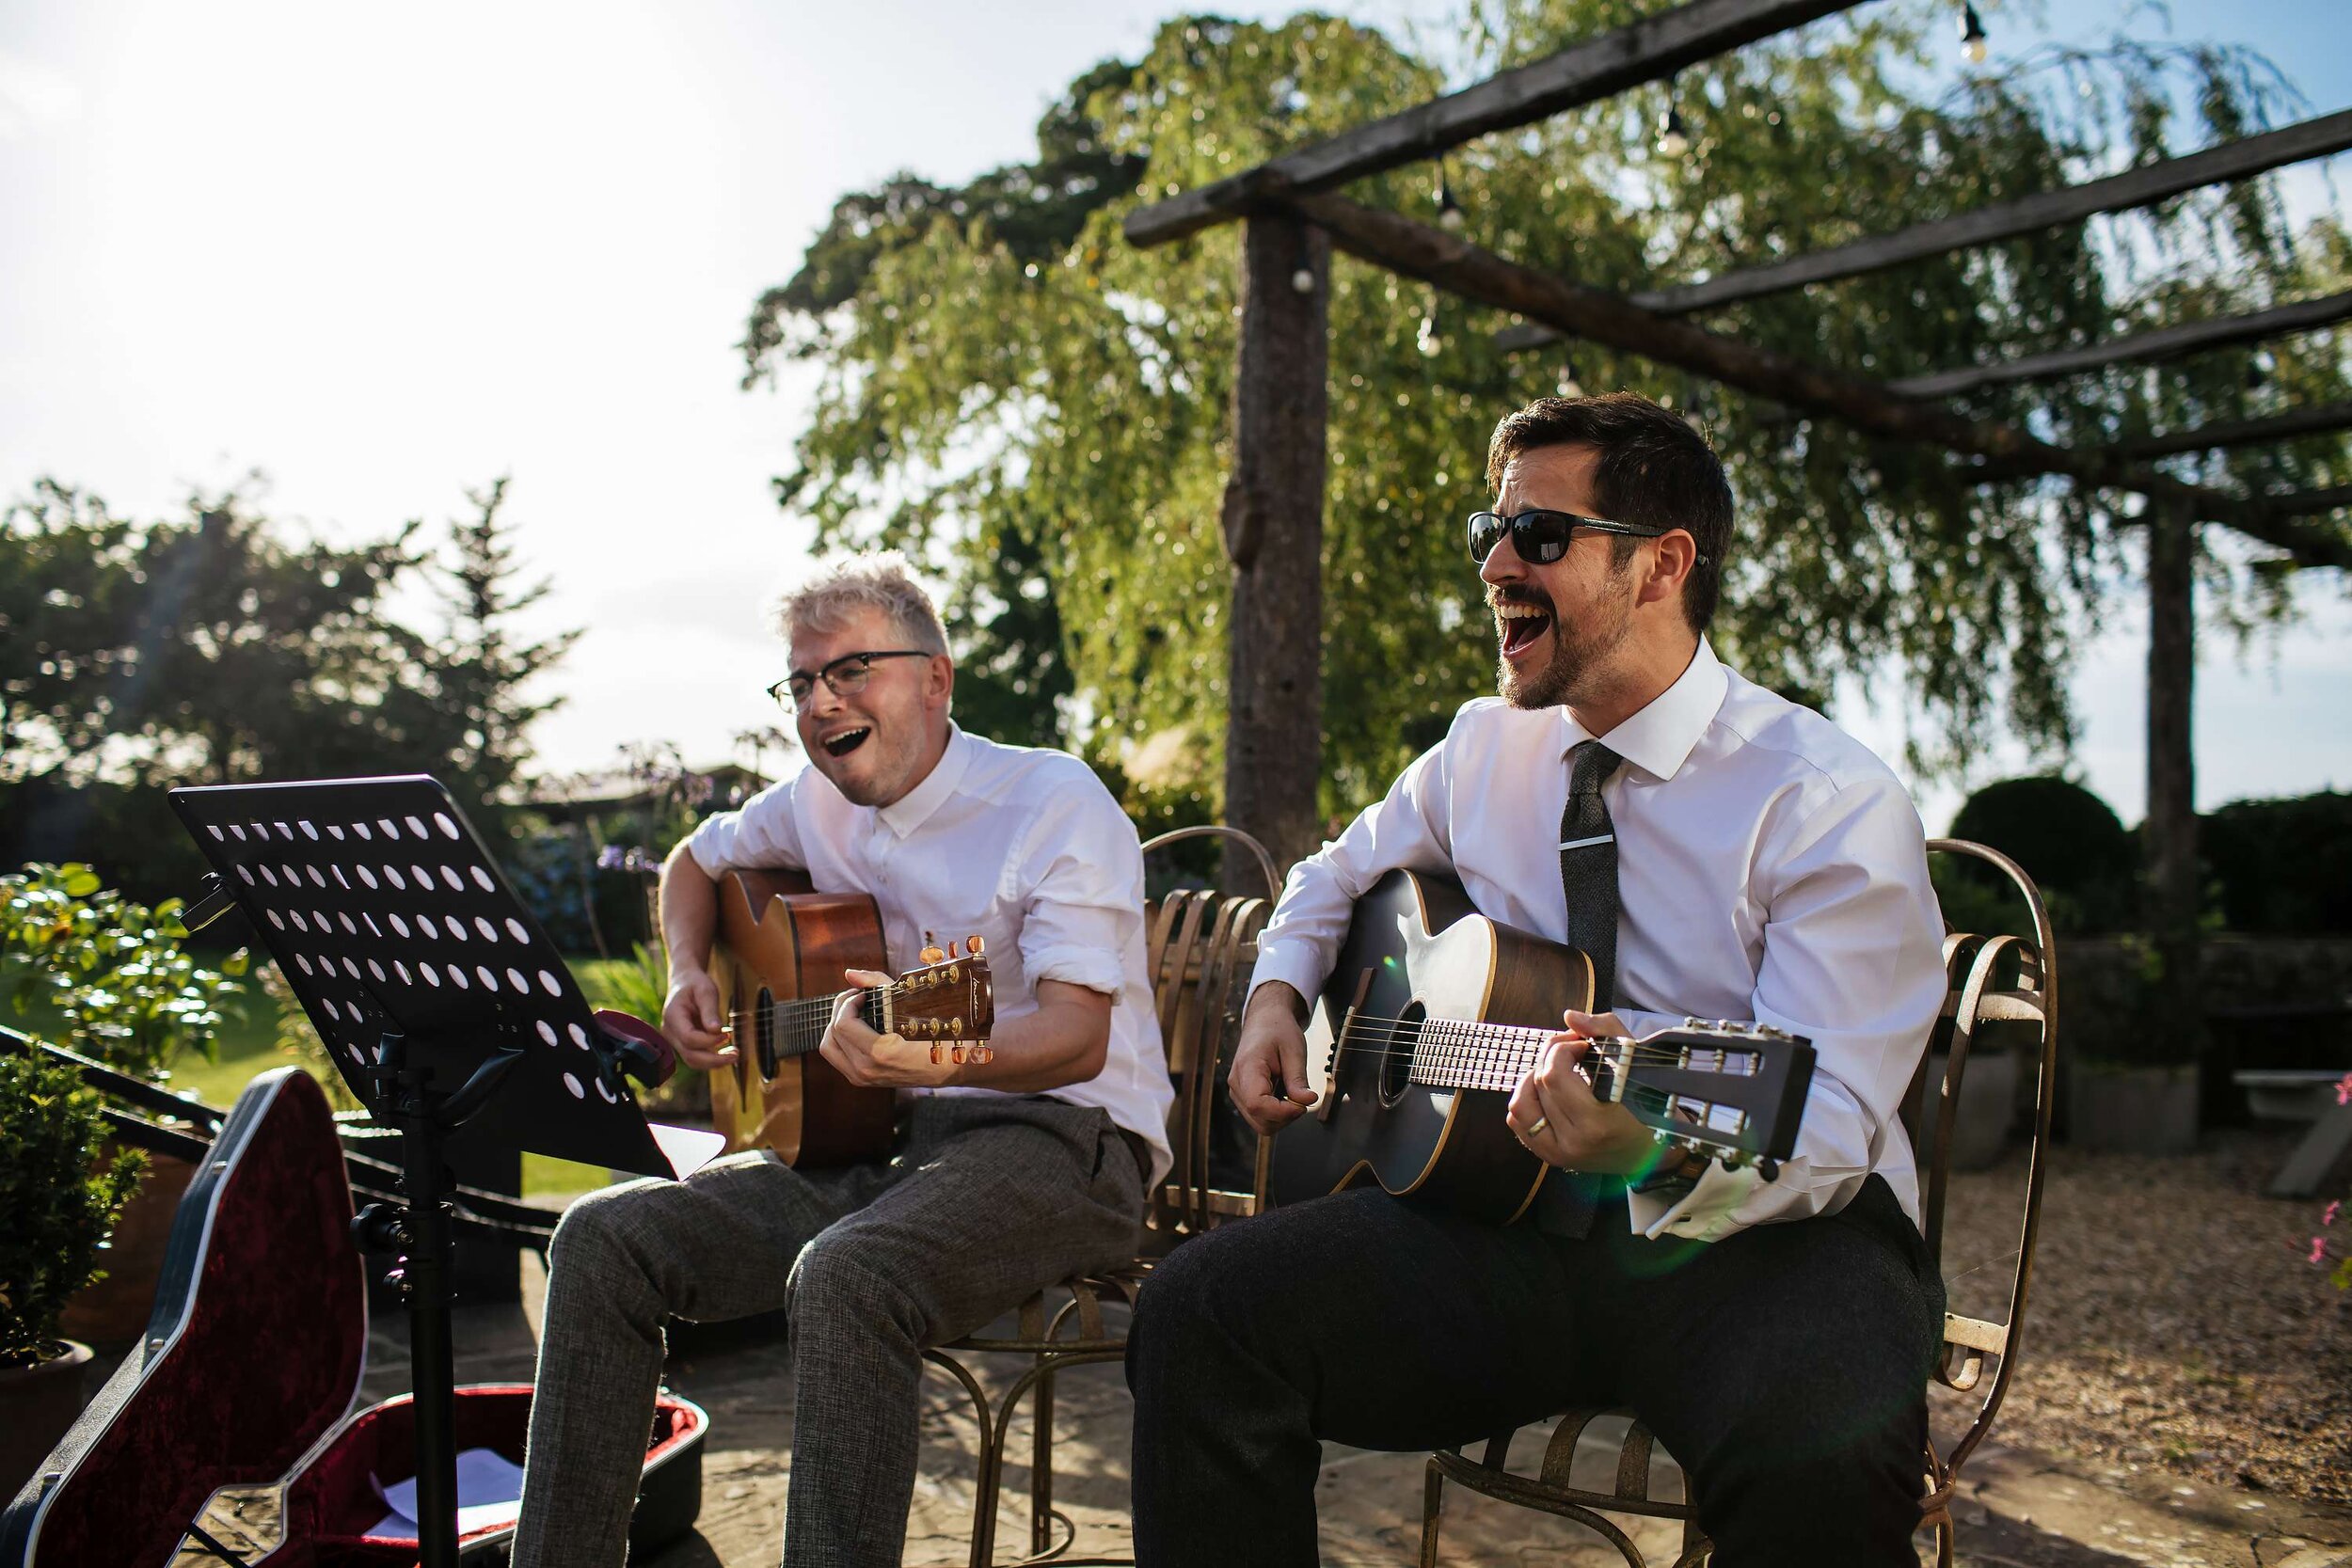 Wedding guests singing at The Star Inn Harome